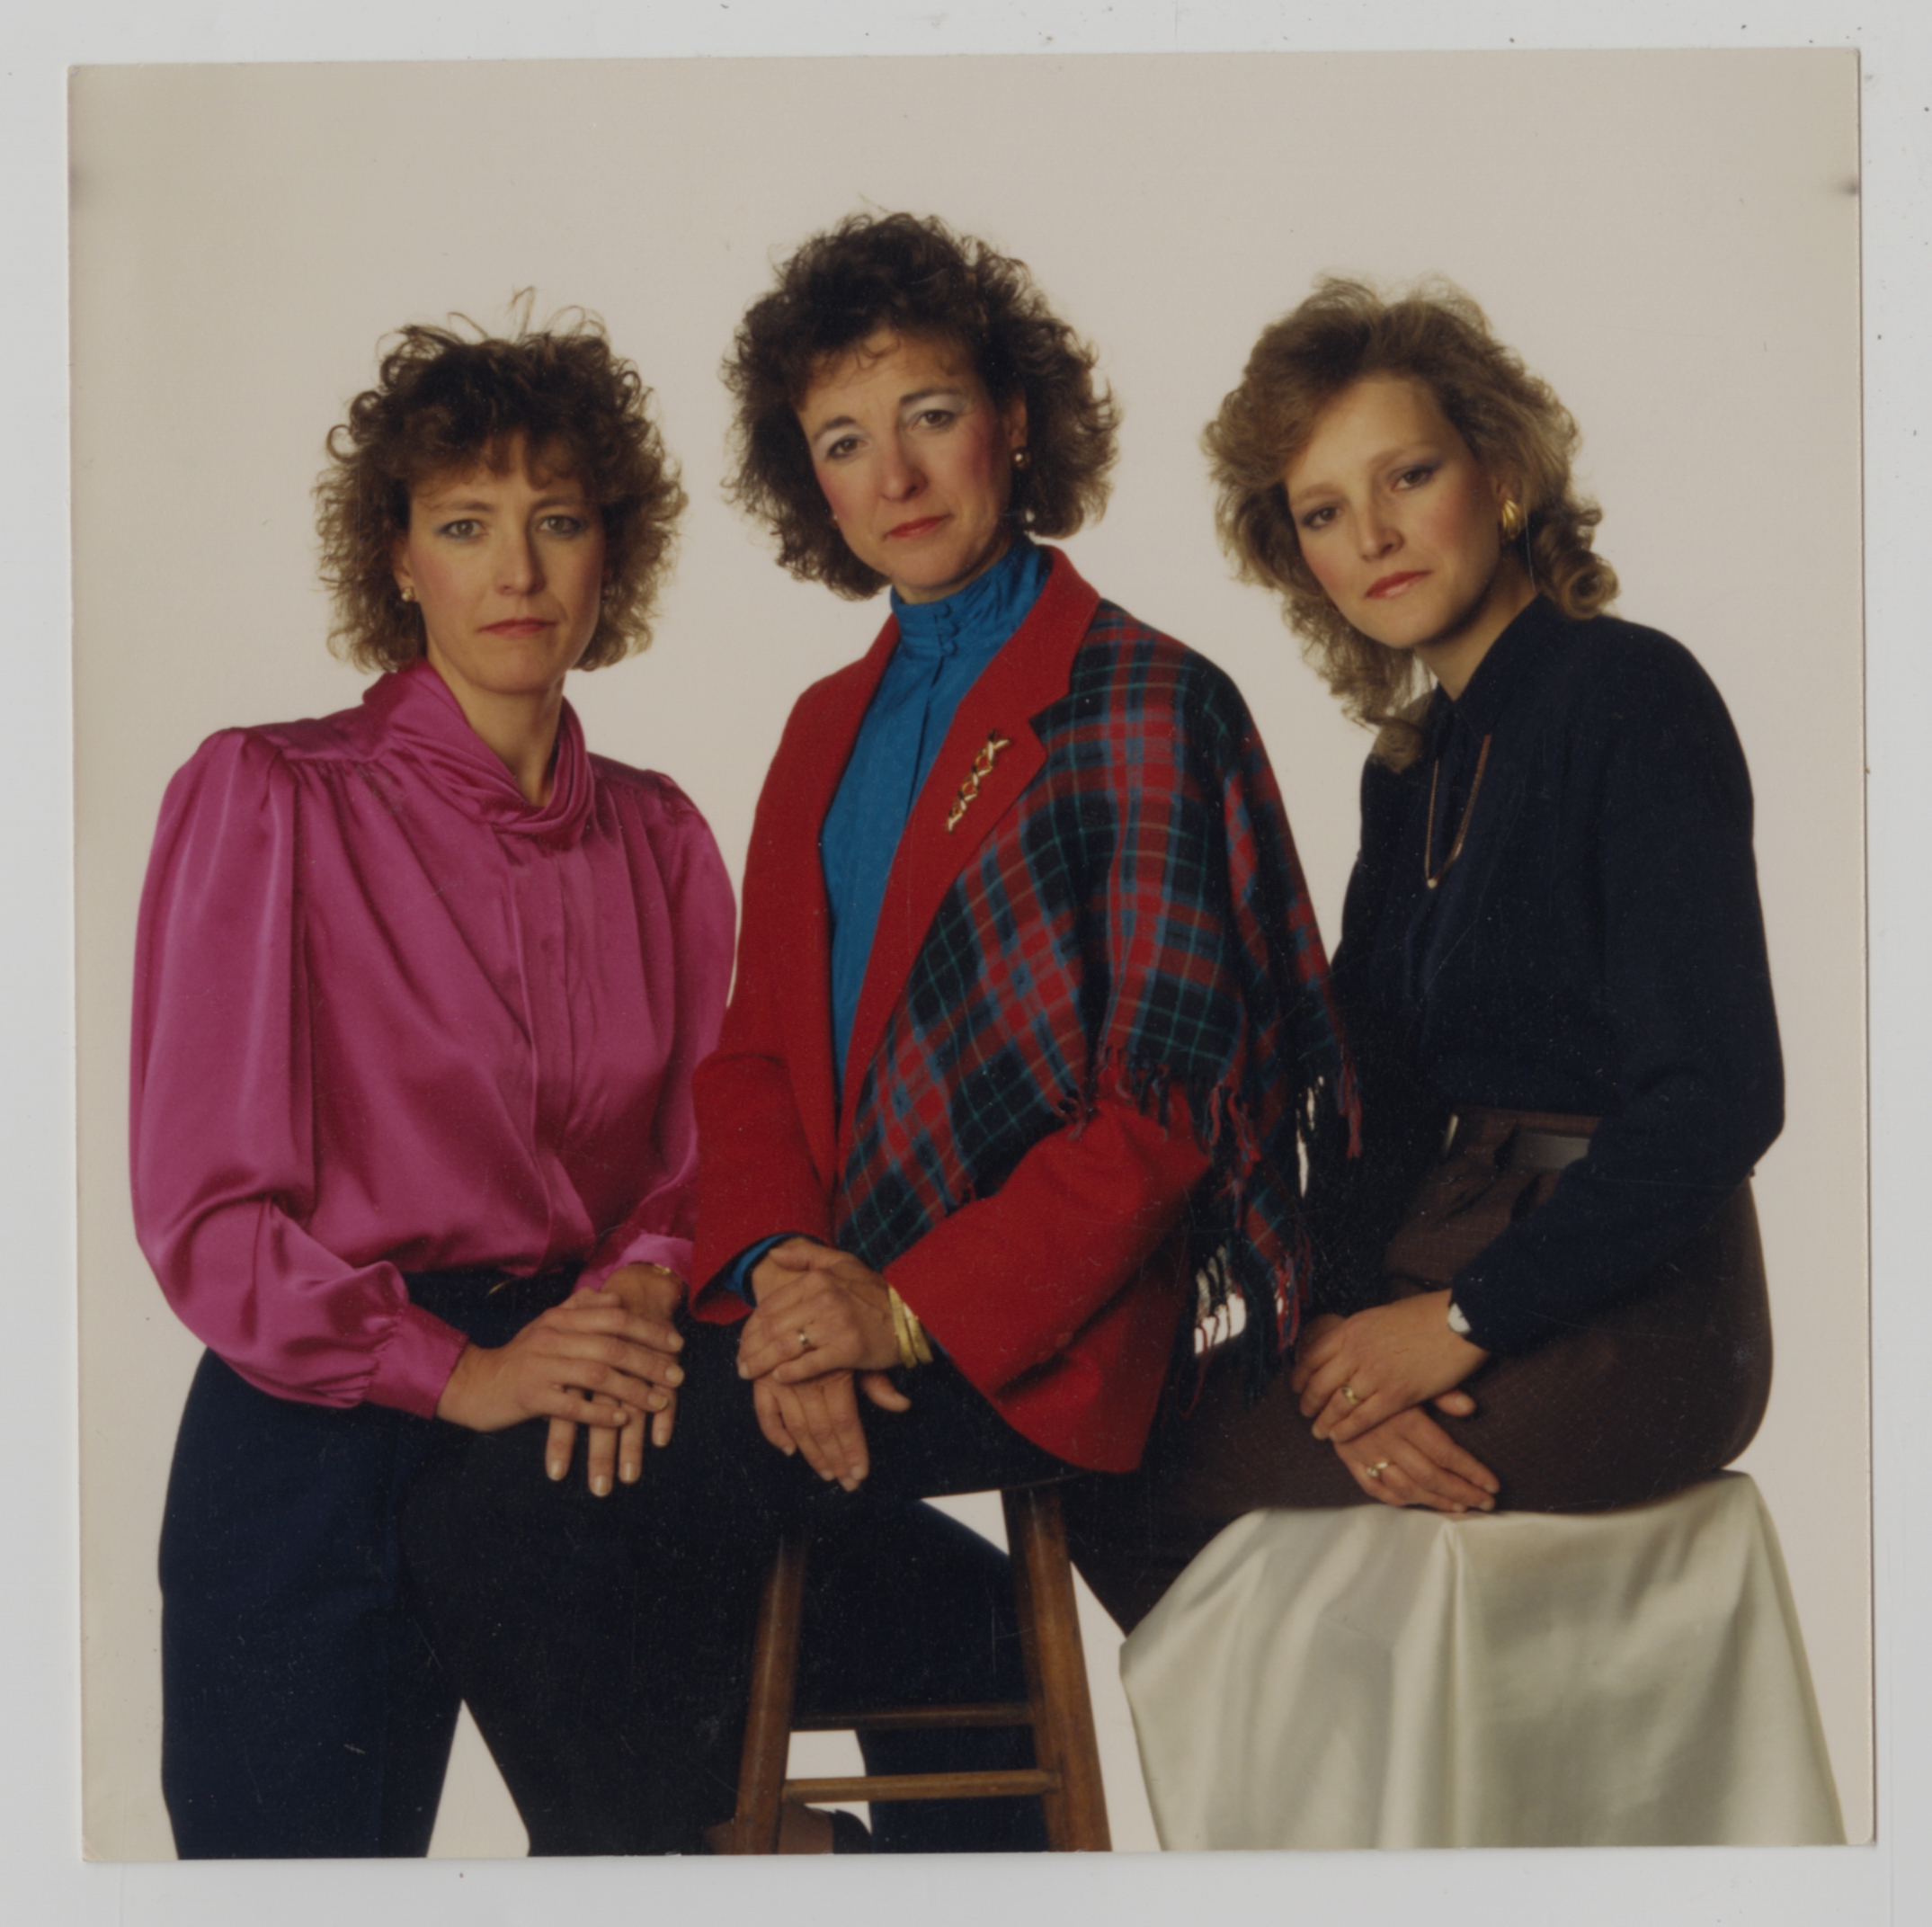 The three McGinnis Sisters posing together for a portrait.